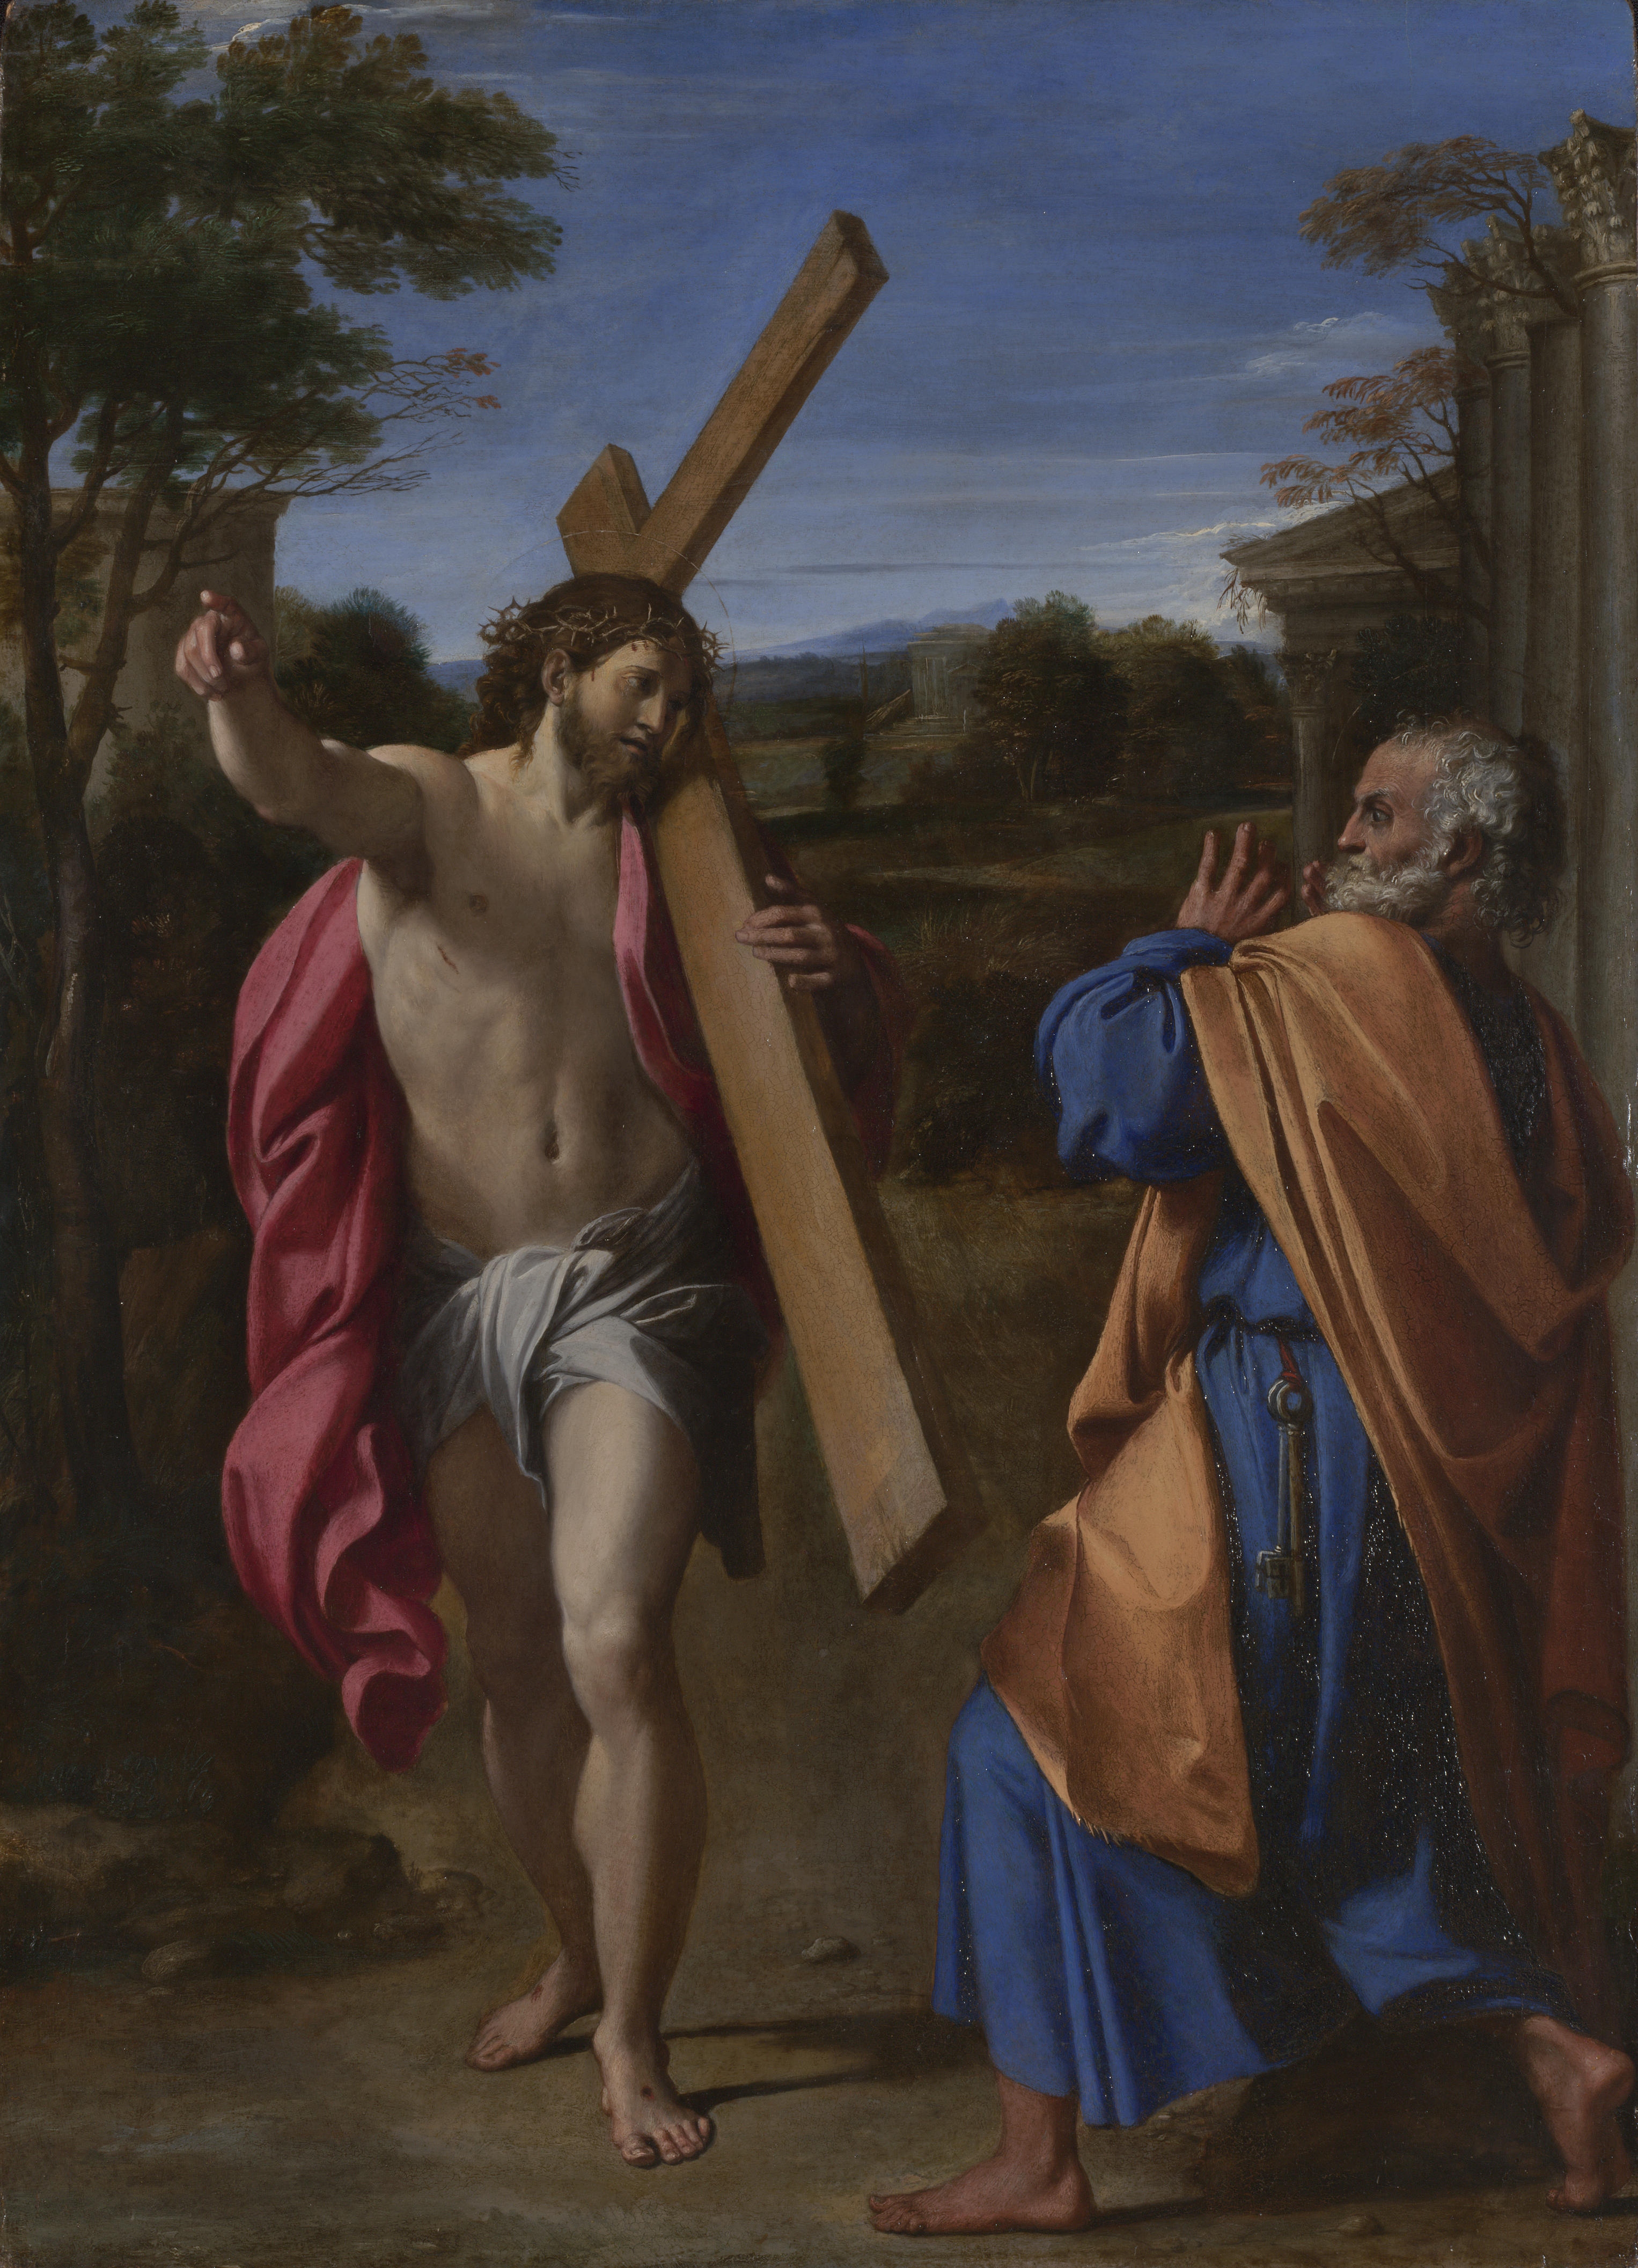 Full title: Christ appearing to Saint Peter on the Appian Way Artist: Annibale Carracci Date made: 1601-2 Source: http://www.nationalgalleryimages.co.uk/ Contact: picture.library@nationalgallery.co.uk Copyright © The National Gallery, London